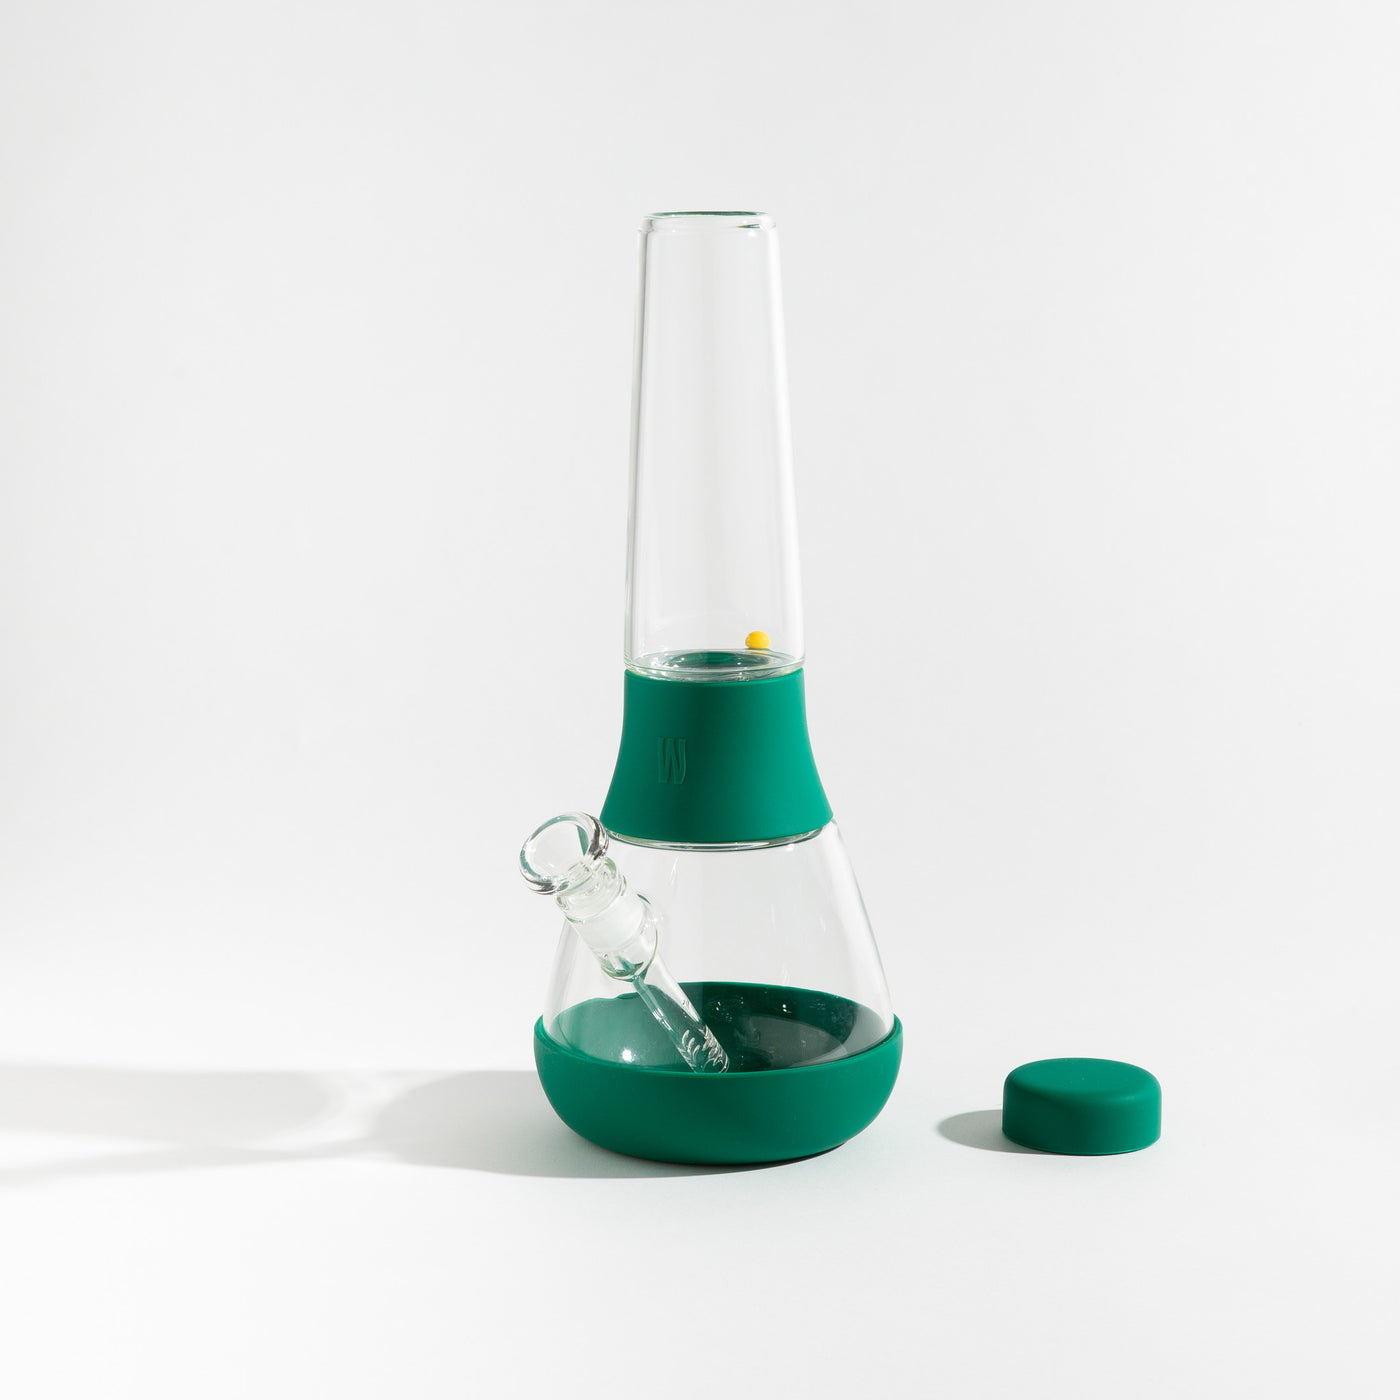 Product photo of a glass waterpipe with forest green silicone covers, cap uncovered, placed on a table.